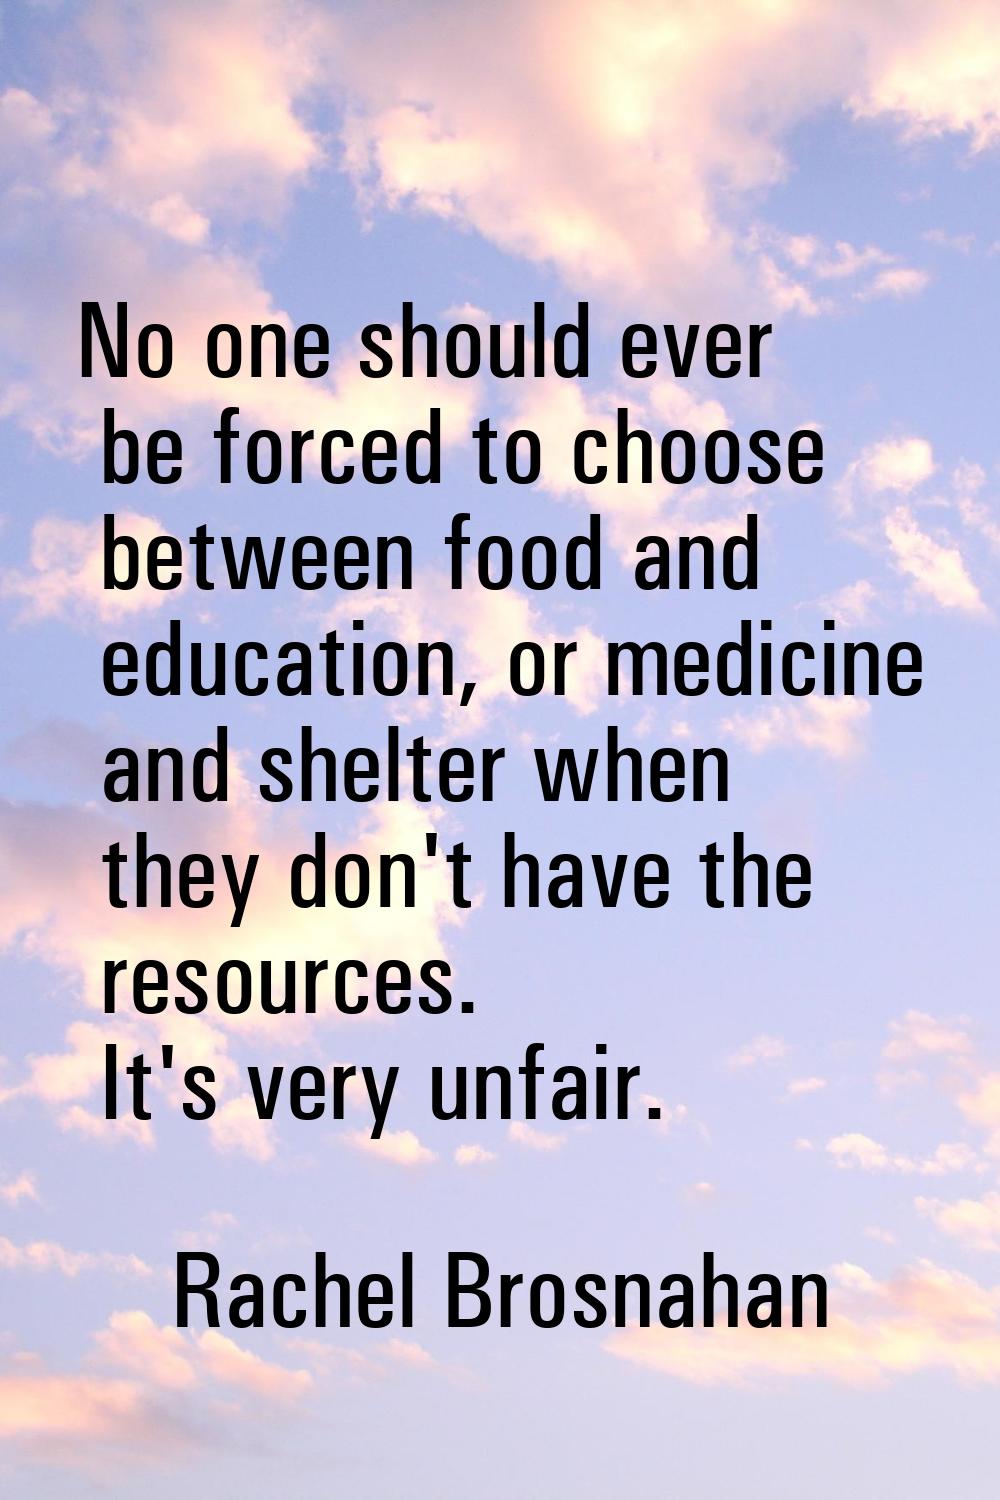 No one should ever be forced to choose between food and education, or medicine and shelter when the